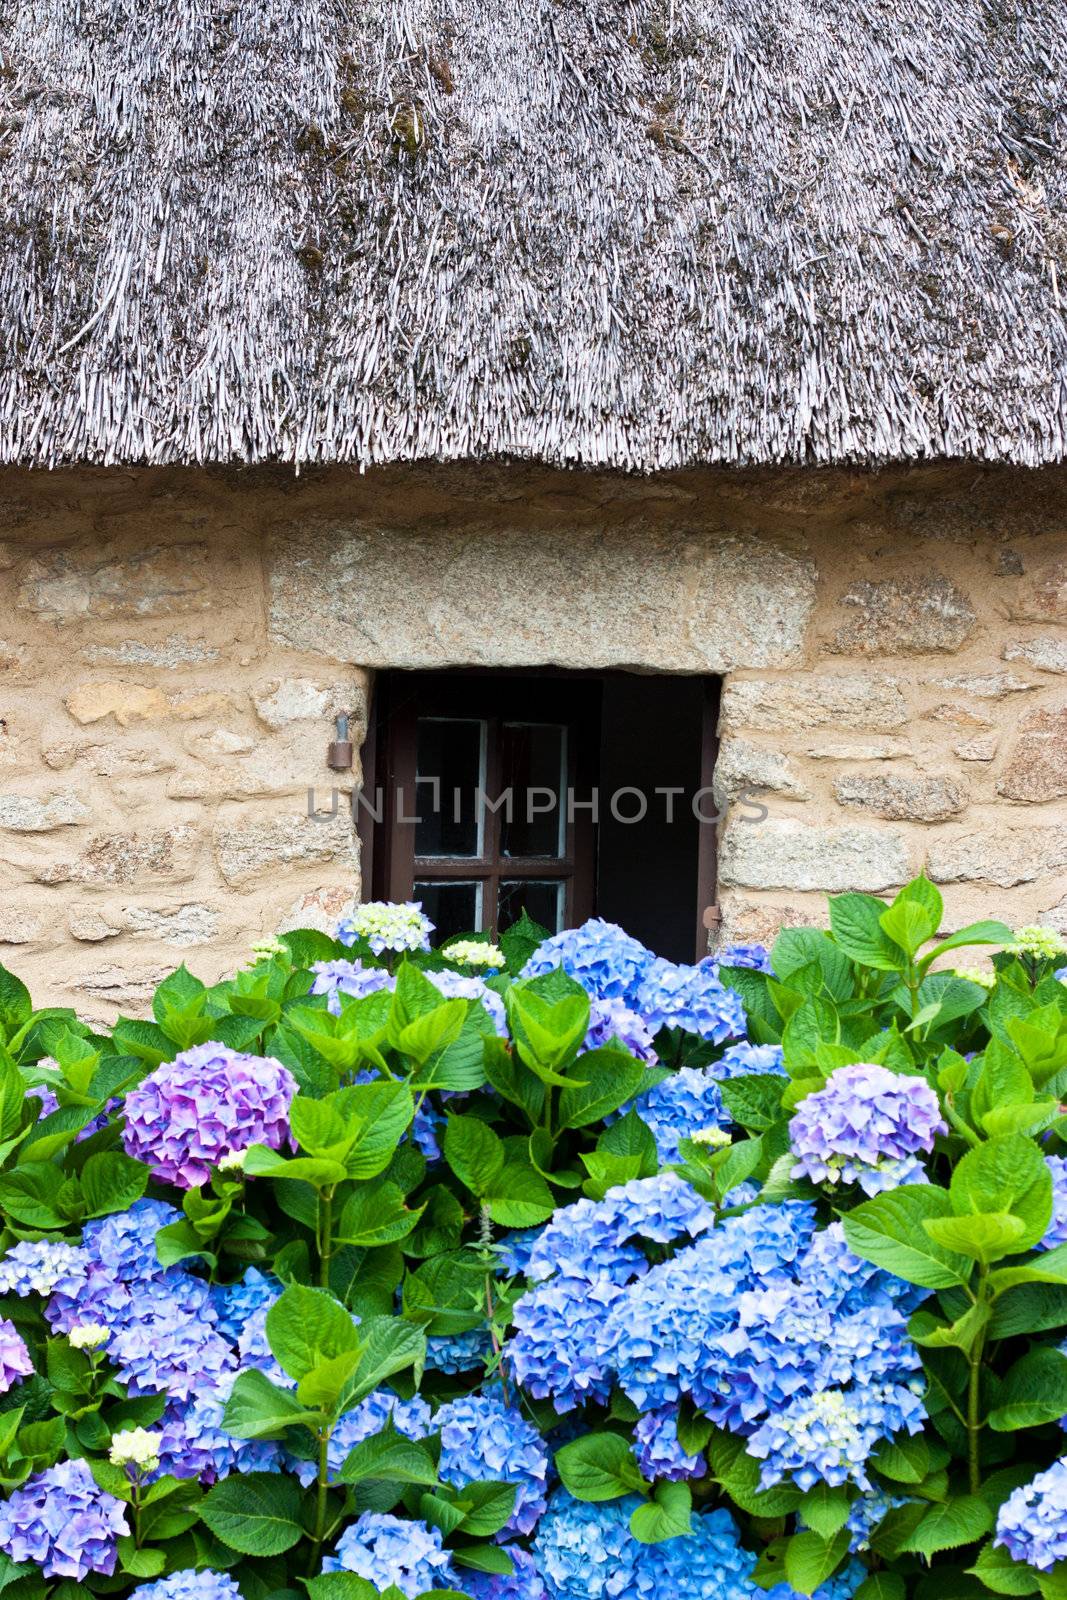 Details of a thatched cottage in Brittany (France) with hydrangeas